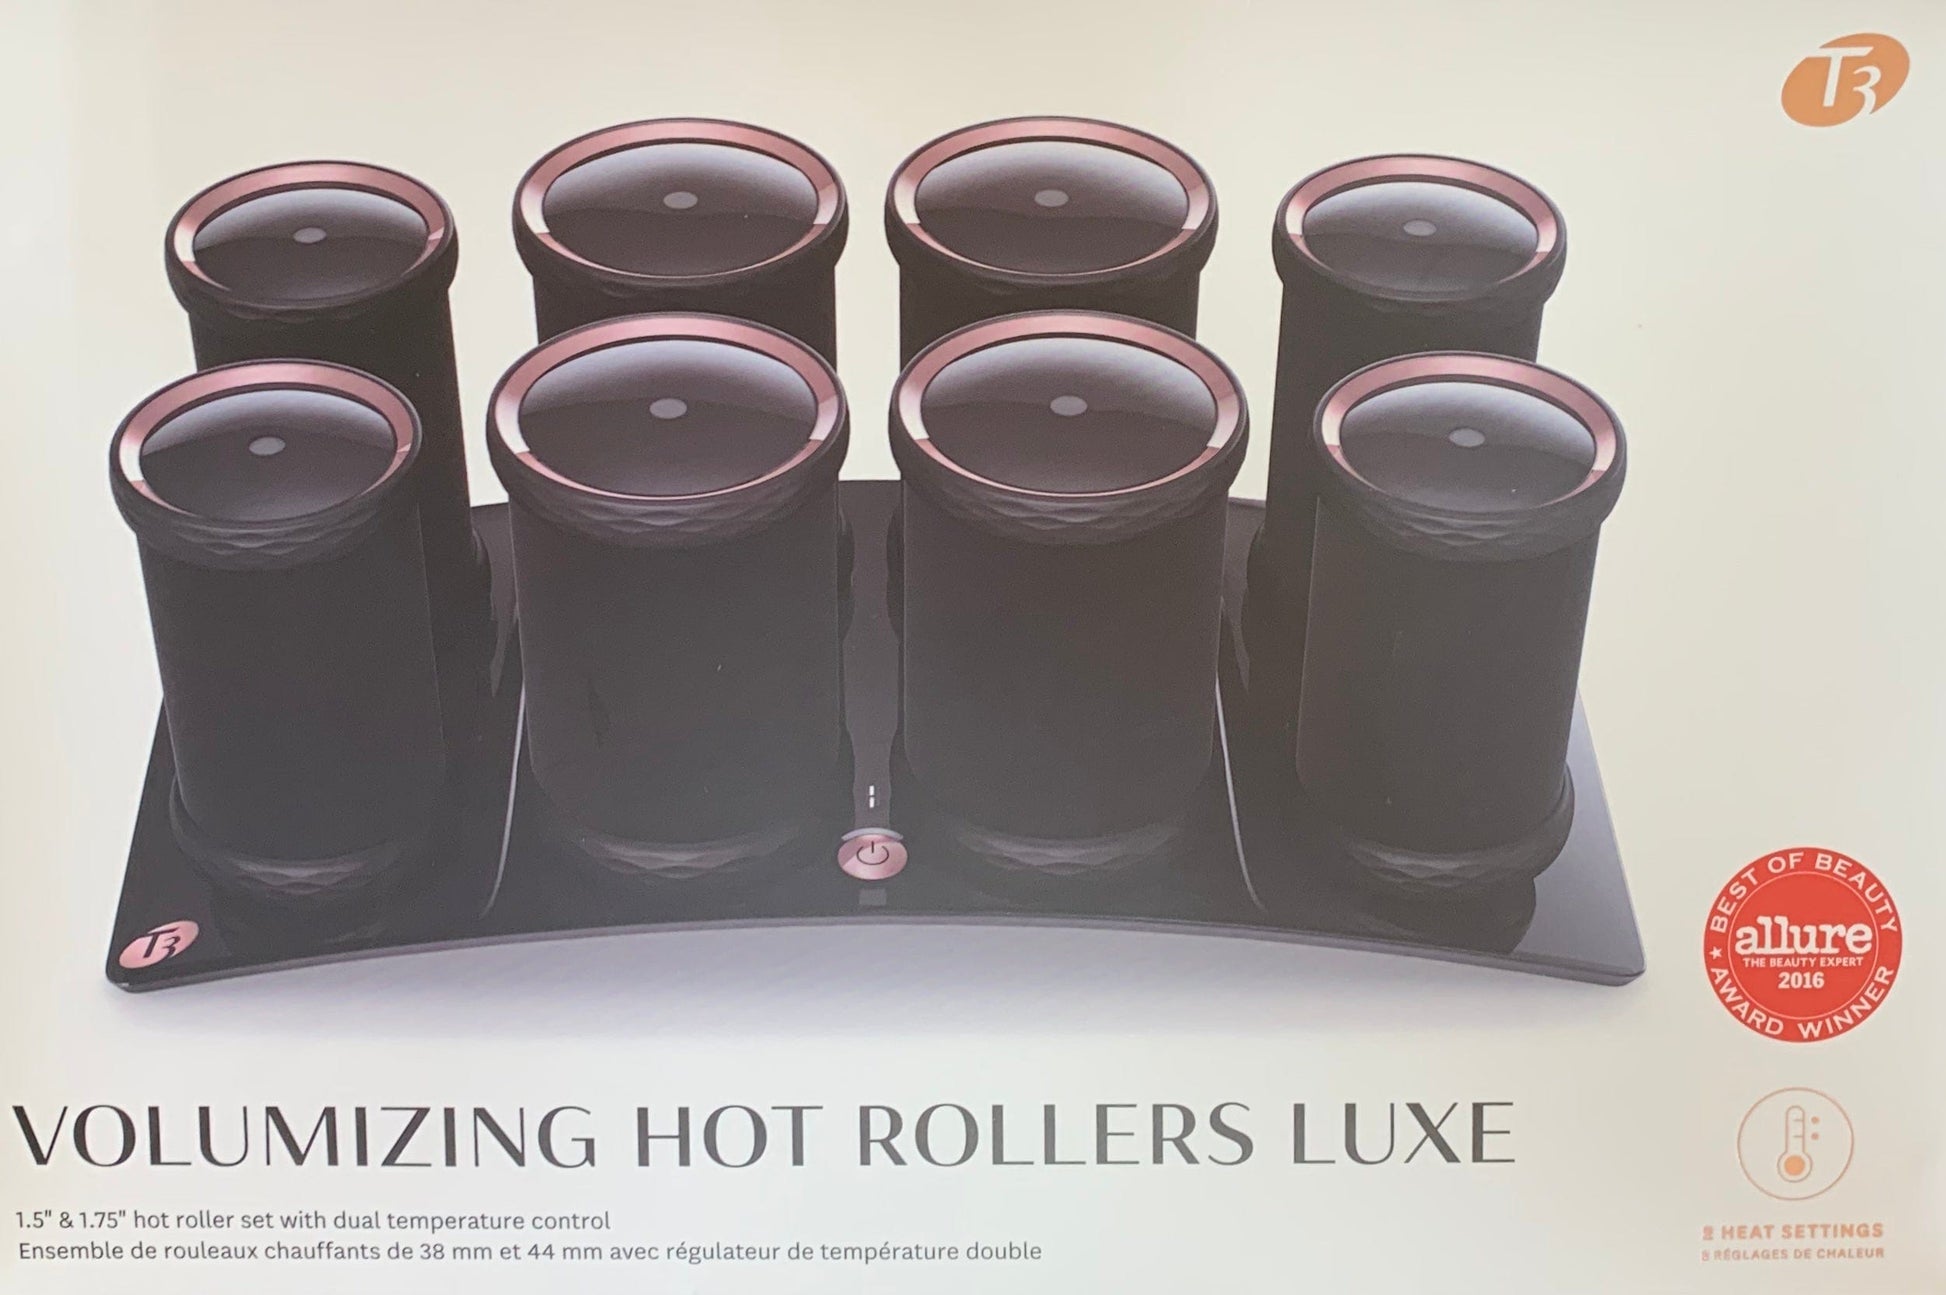 Electric Hair Hot Rollers T3 Micro Luxe Set 8pcs Med-Long Hair Hot Rollers